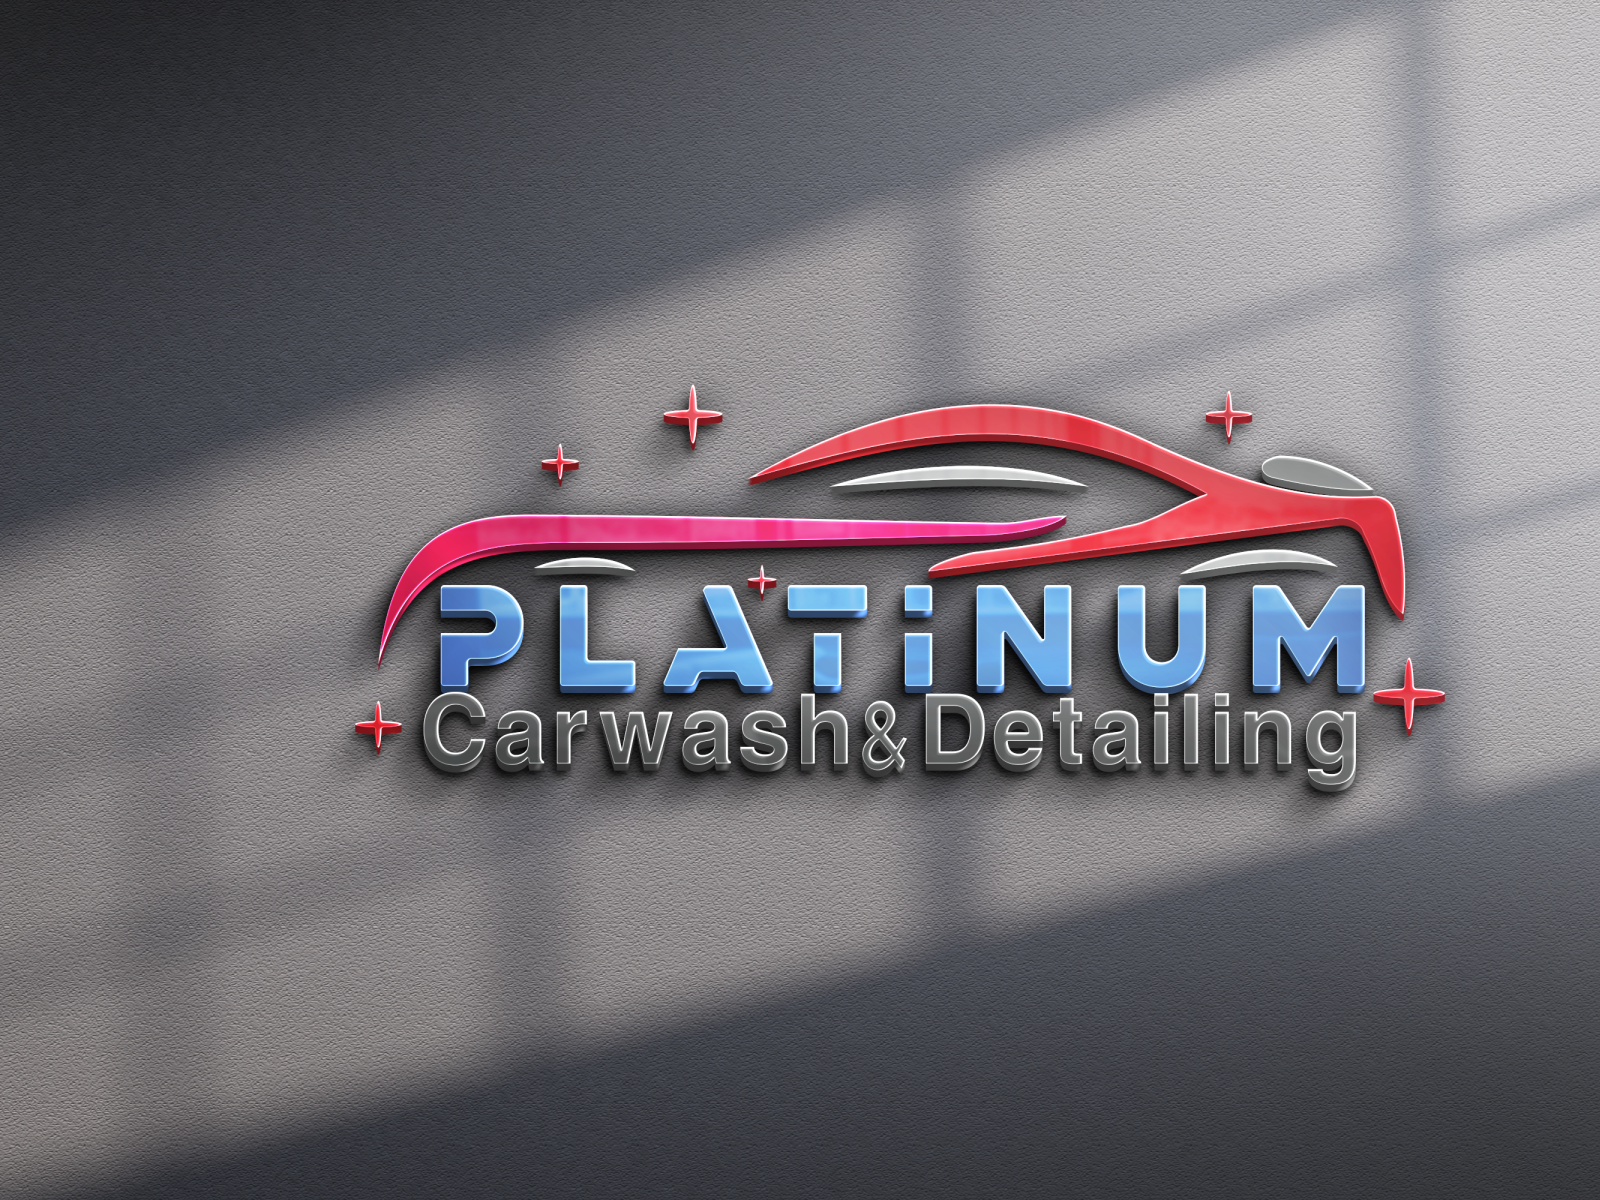 PLATINUM PROFESSIONAL SERVICES by Studio_i on Dribbble